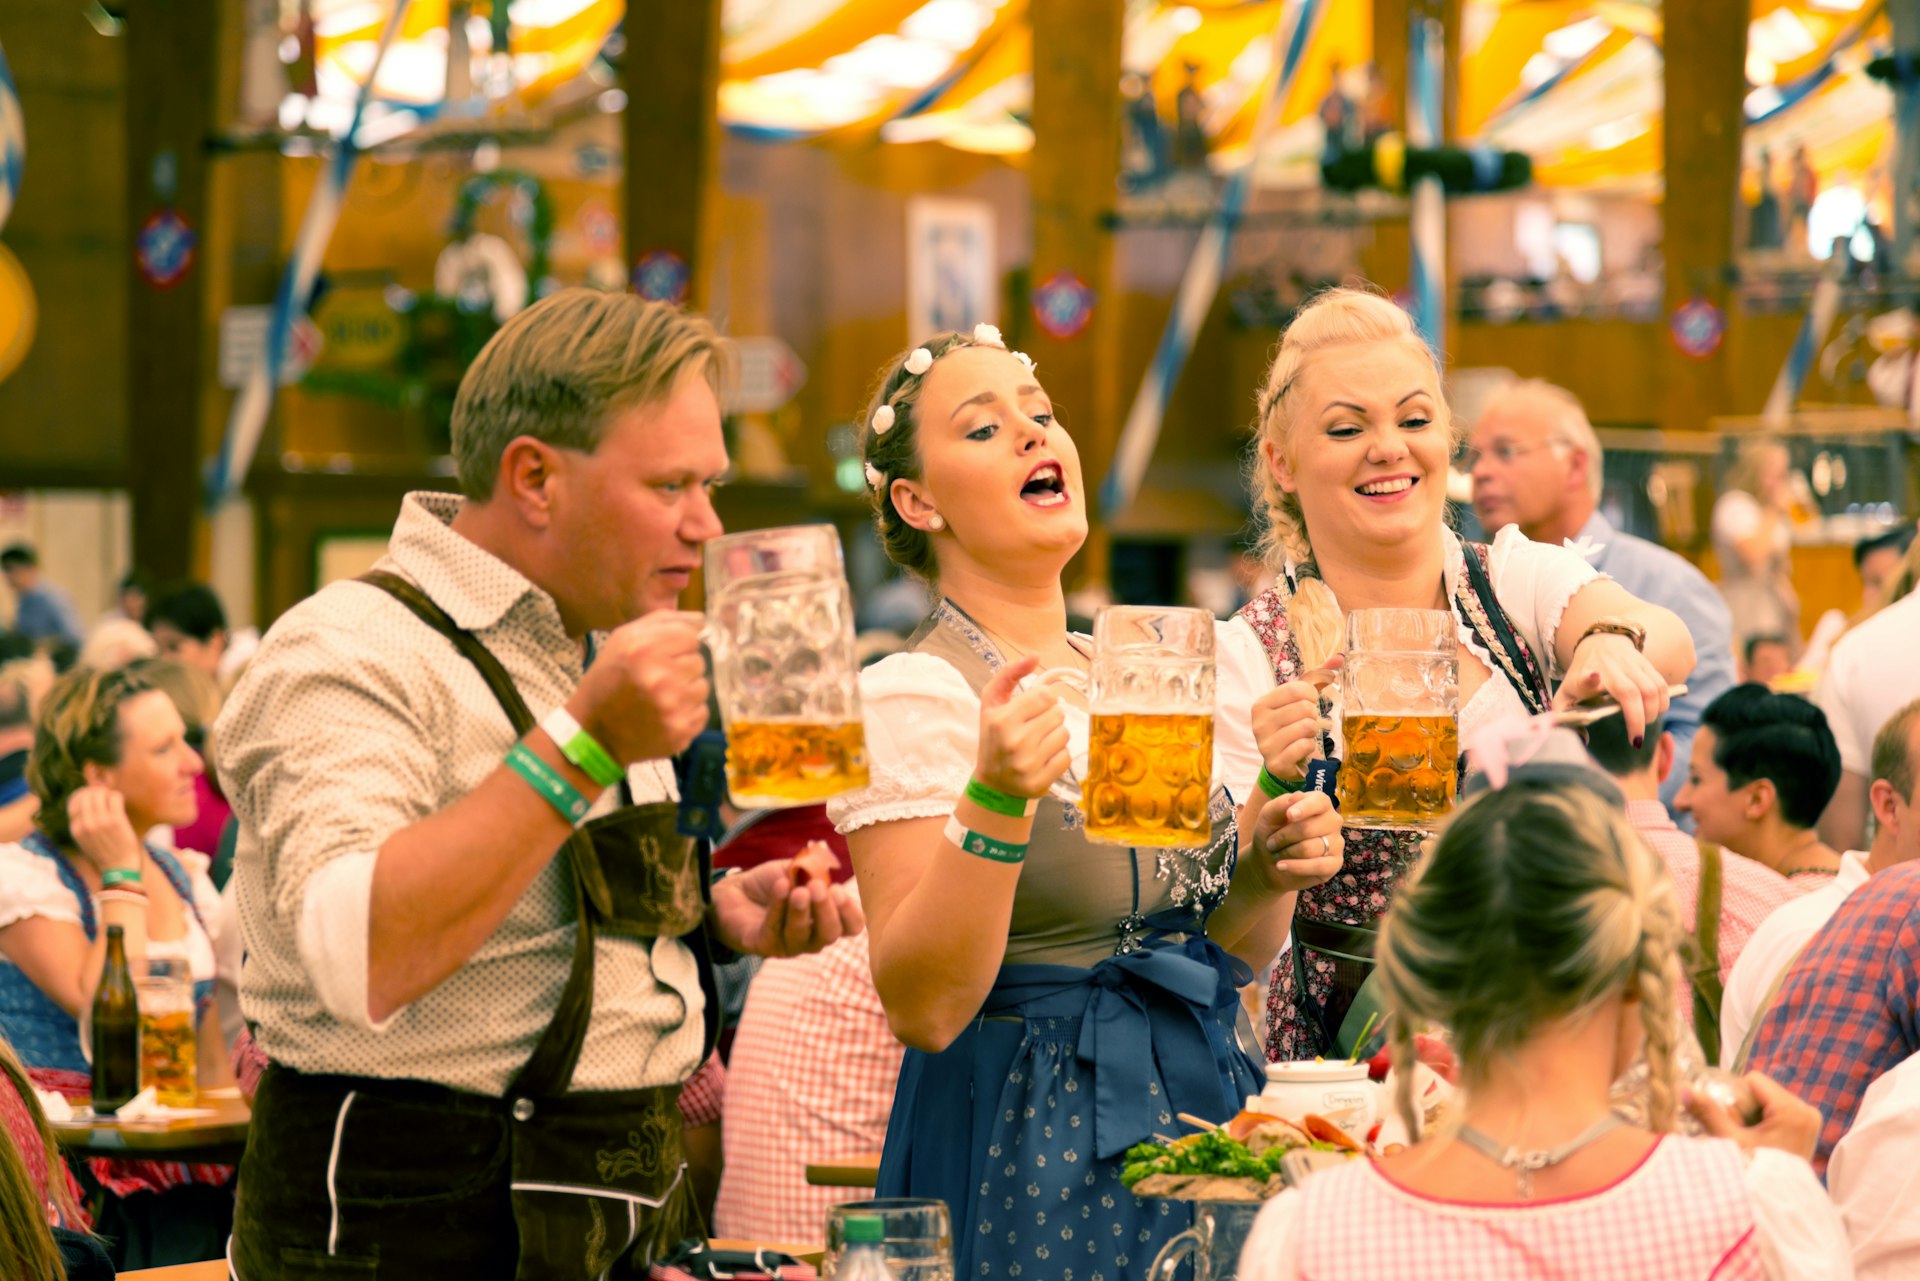 Two women and one man wear traditional Bavarian costumes during Oktoberfest